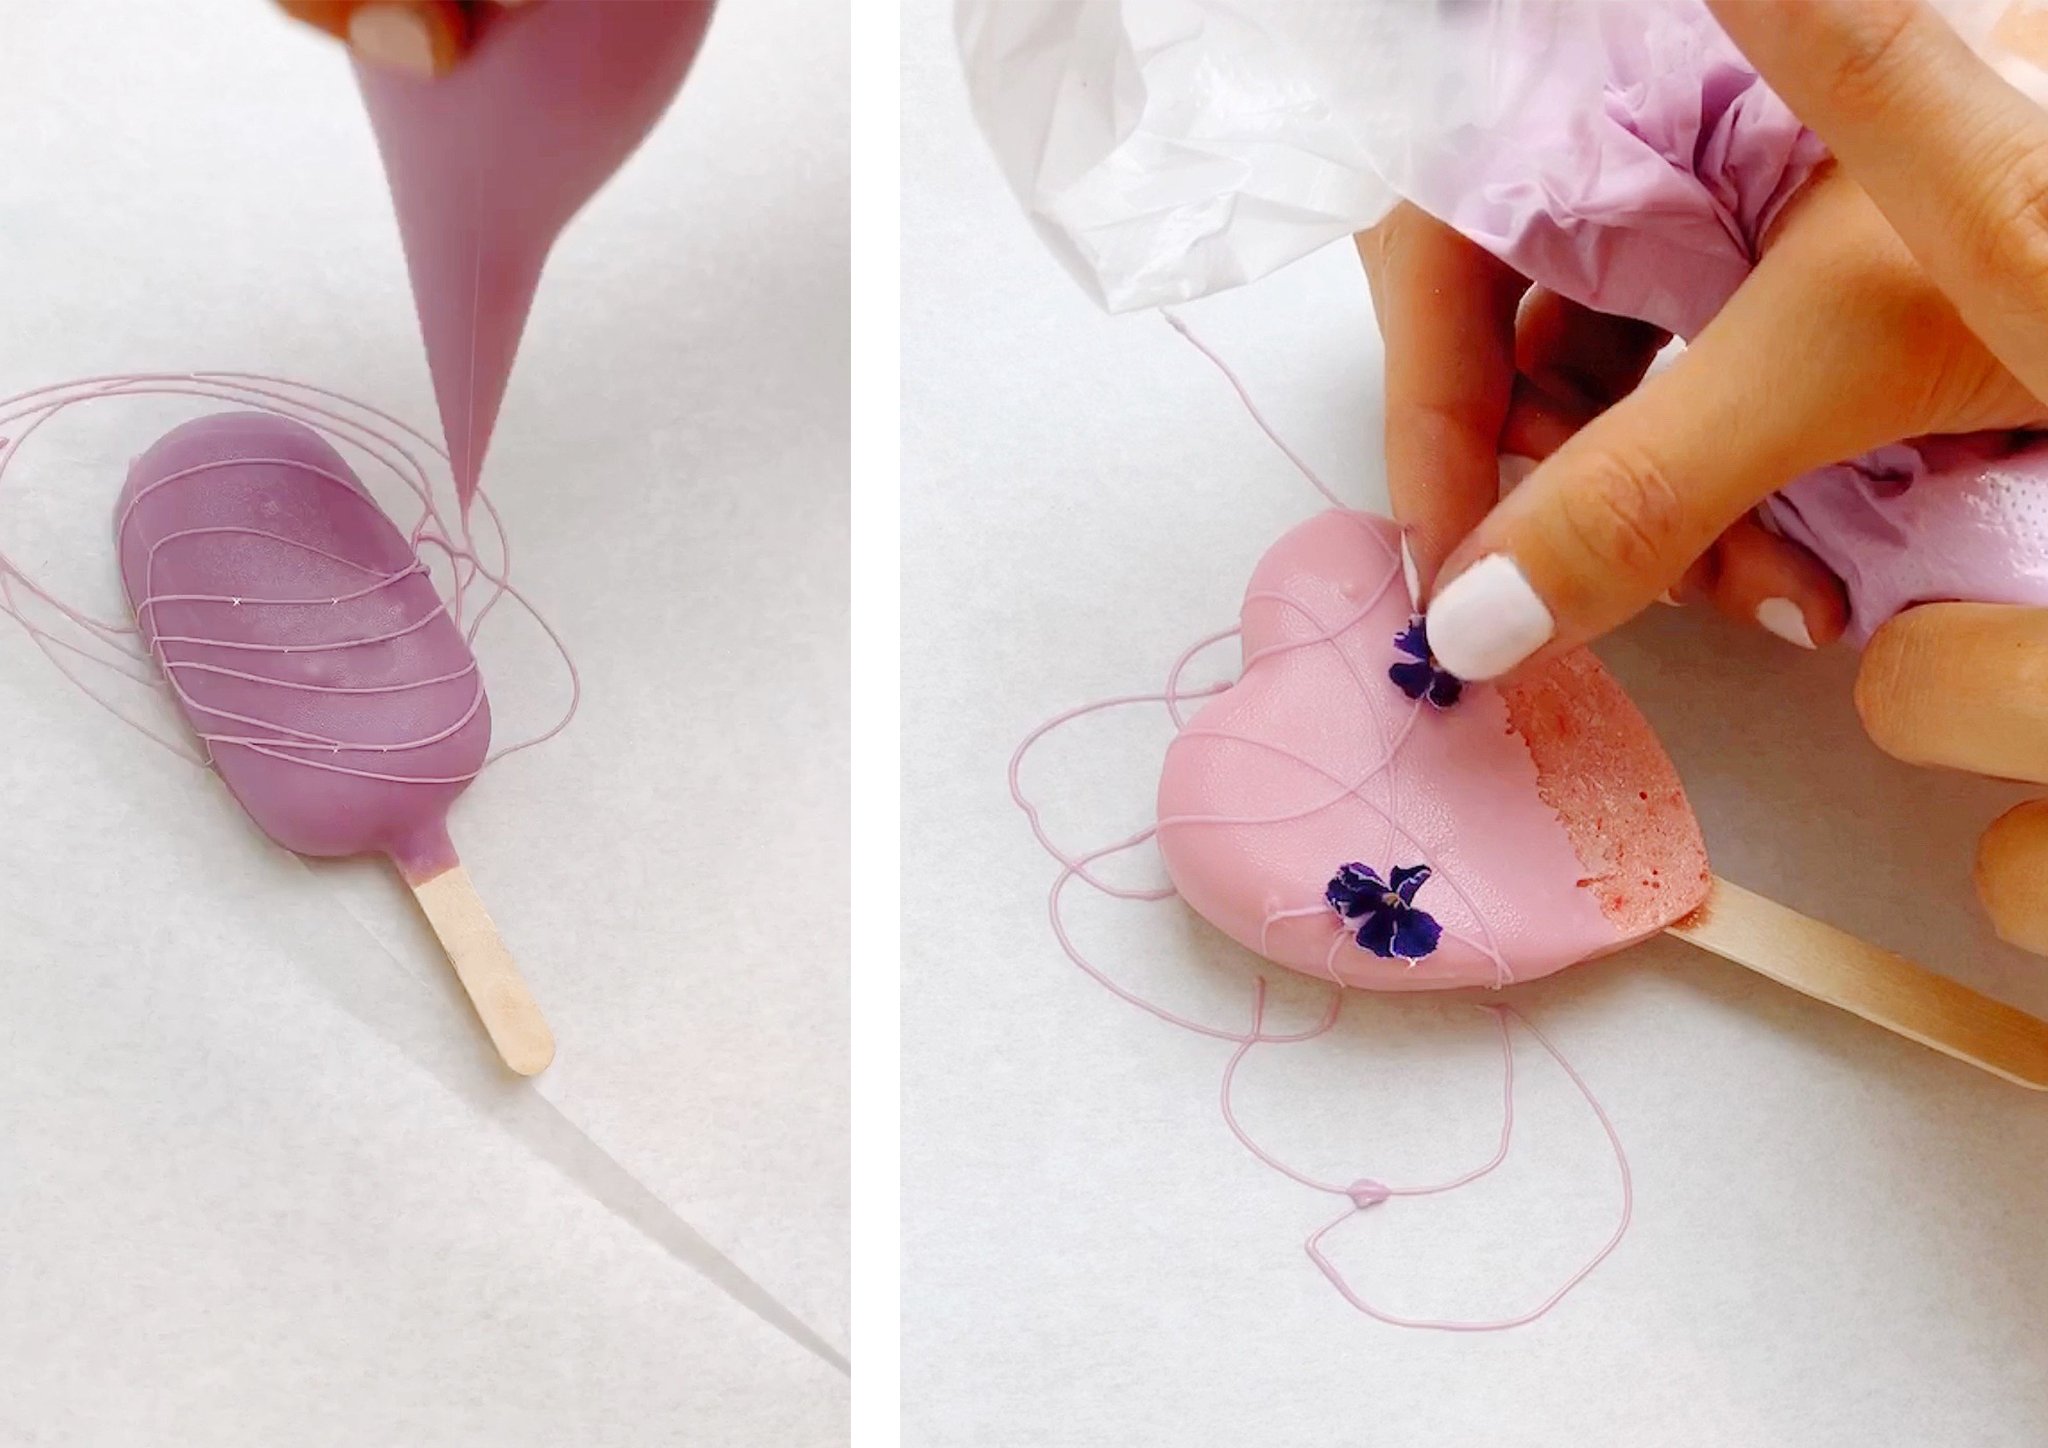 decorating popsicles with chocolate and edible flowers